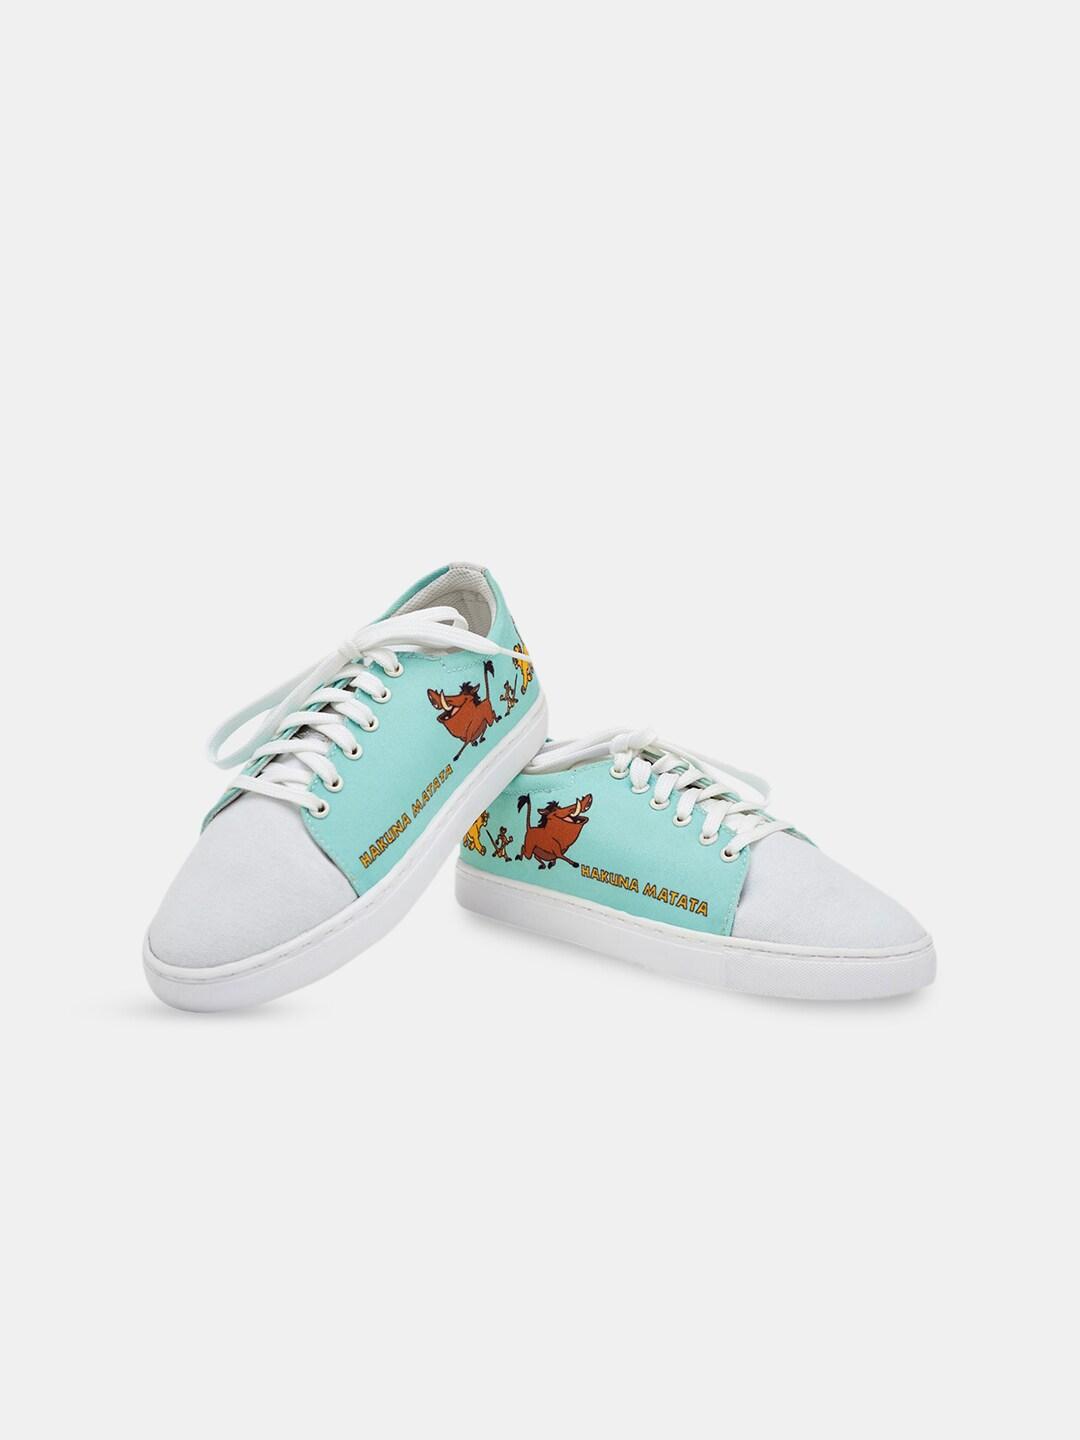 the souled store women lion king printed sneakers